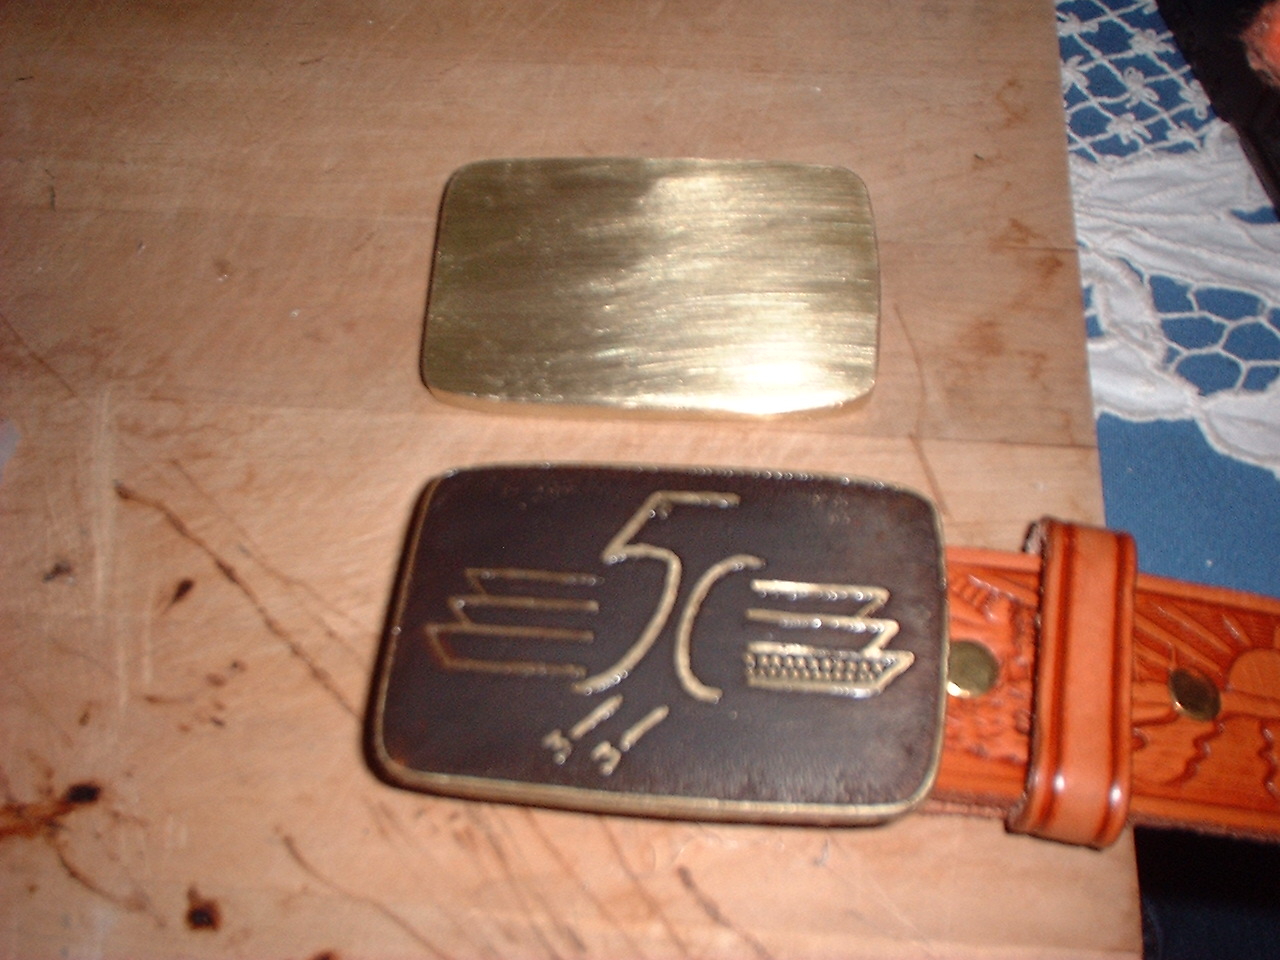 The etched buckle after being darkened (antiqued).